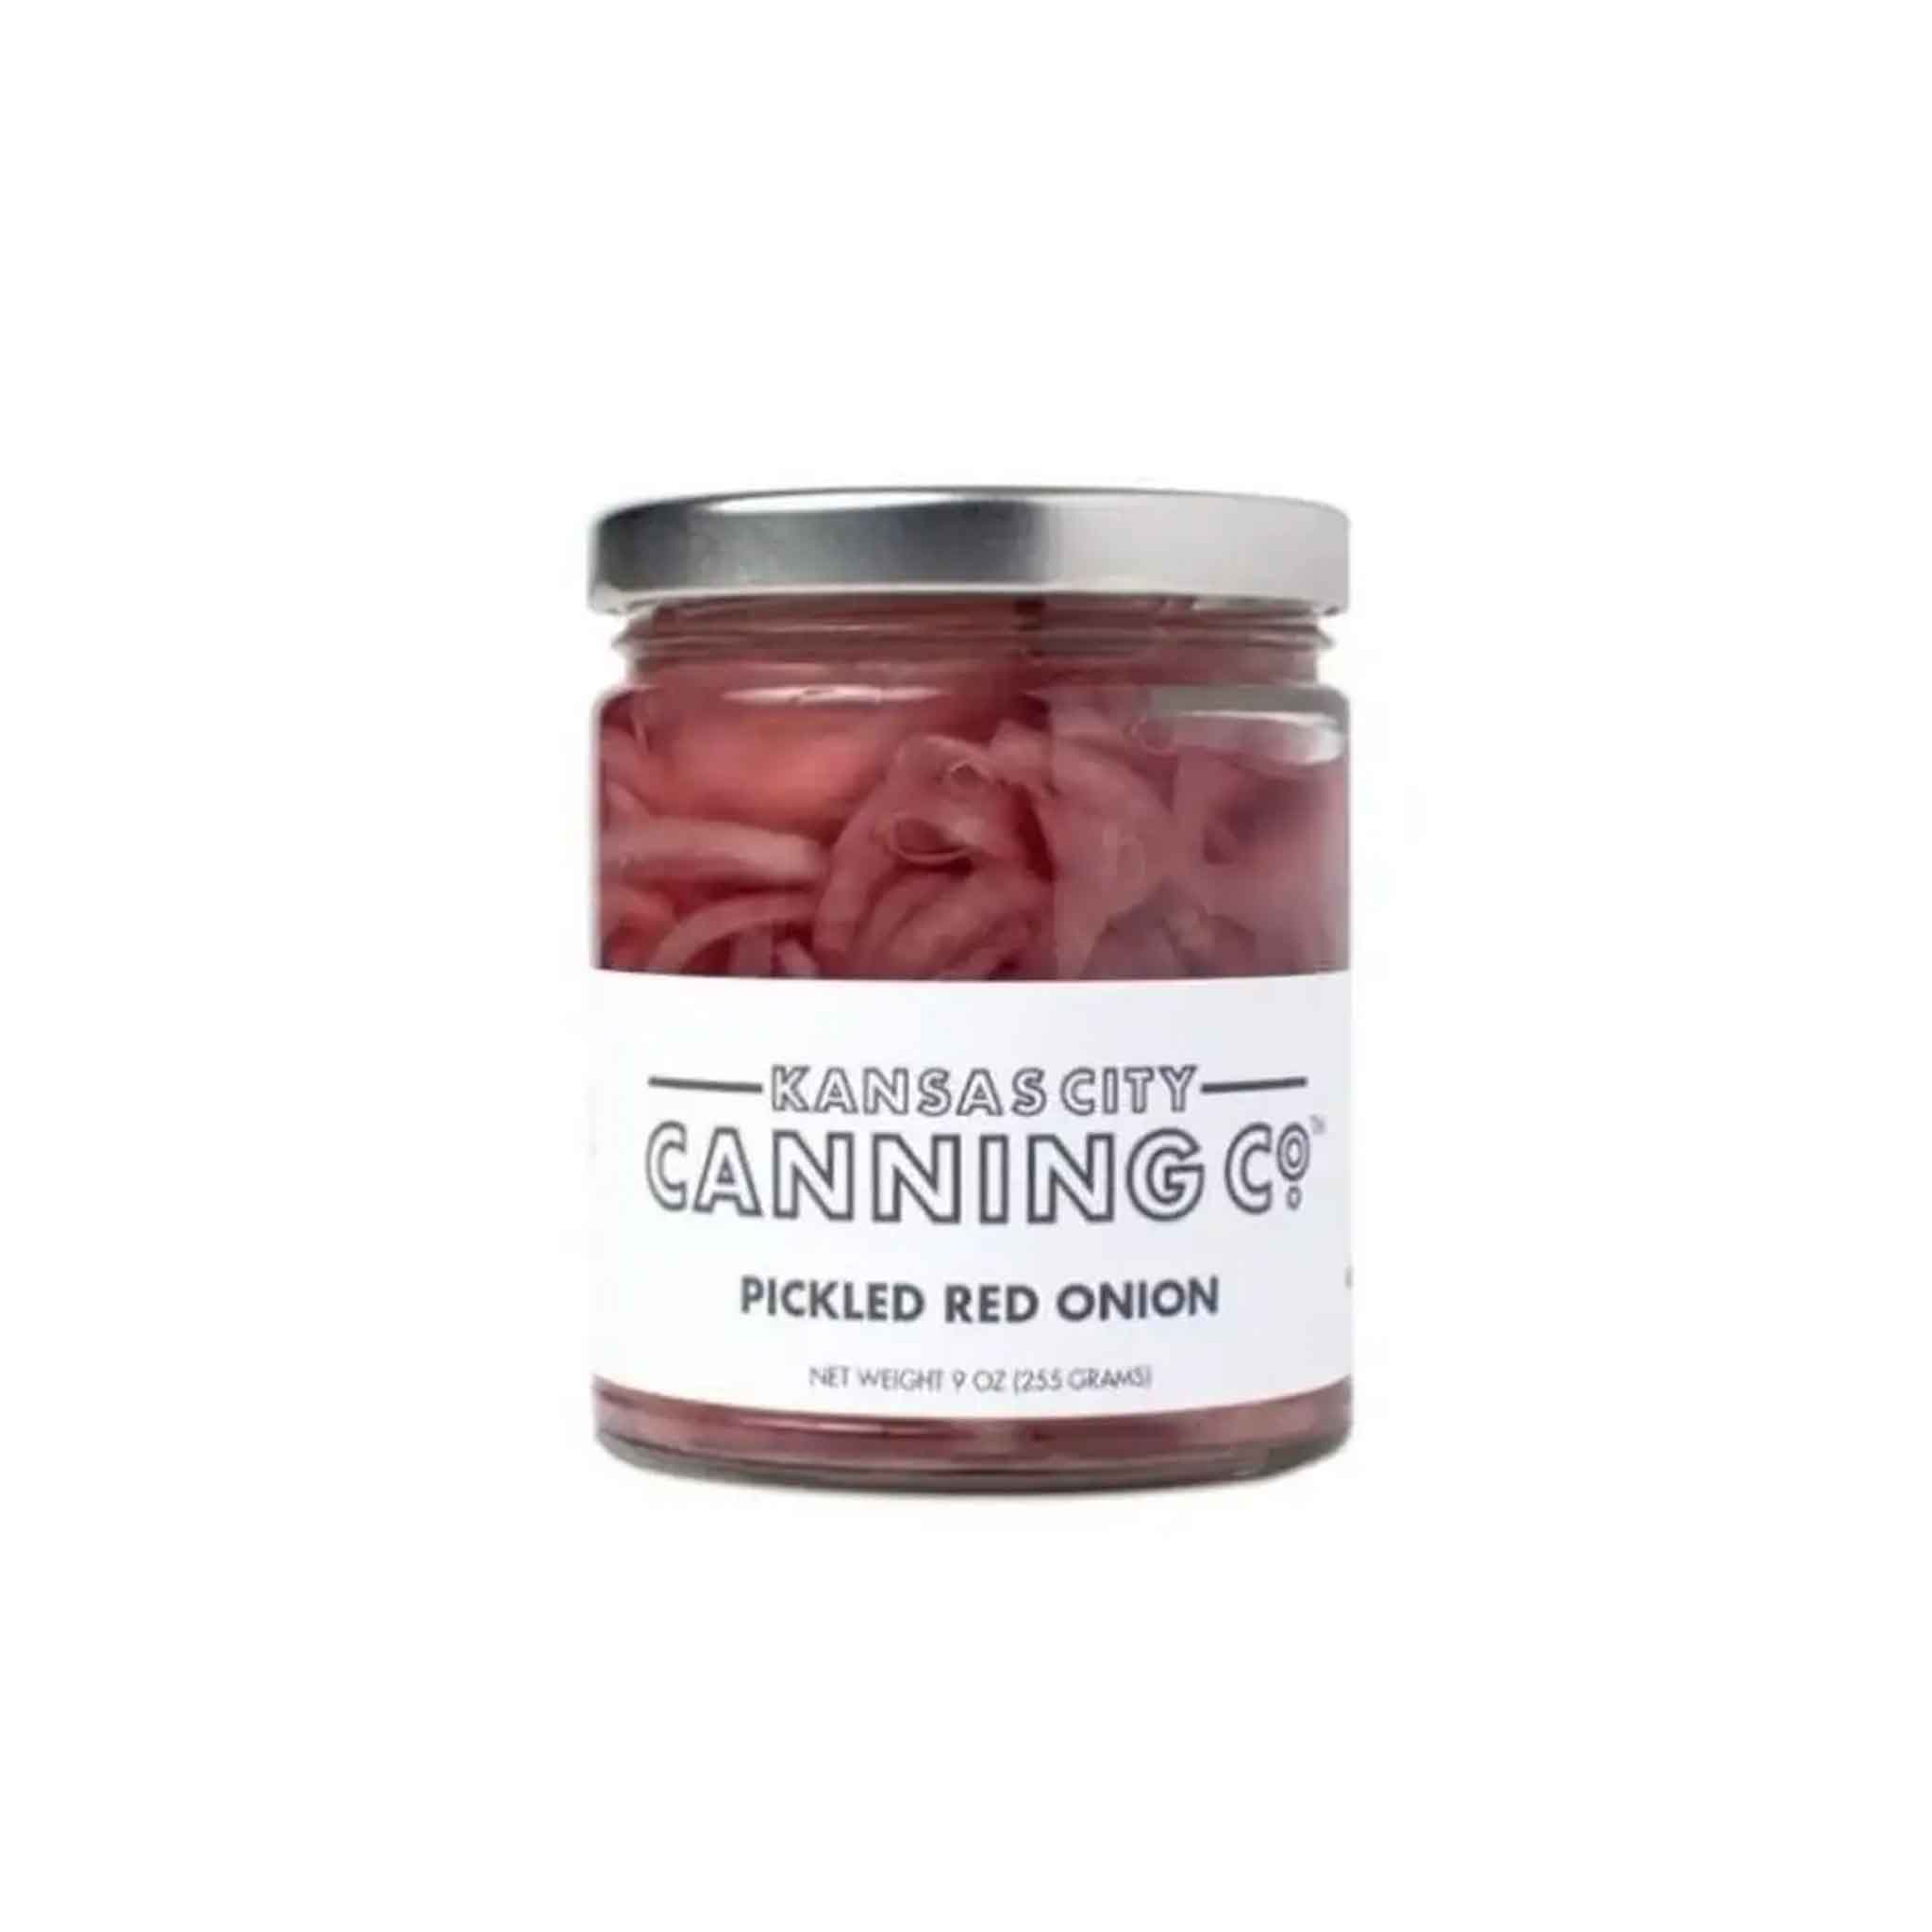 KANSAS CITY CANNING CO. PICKLED RED ONIONS 9oz